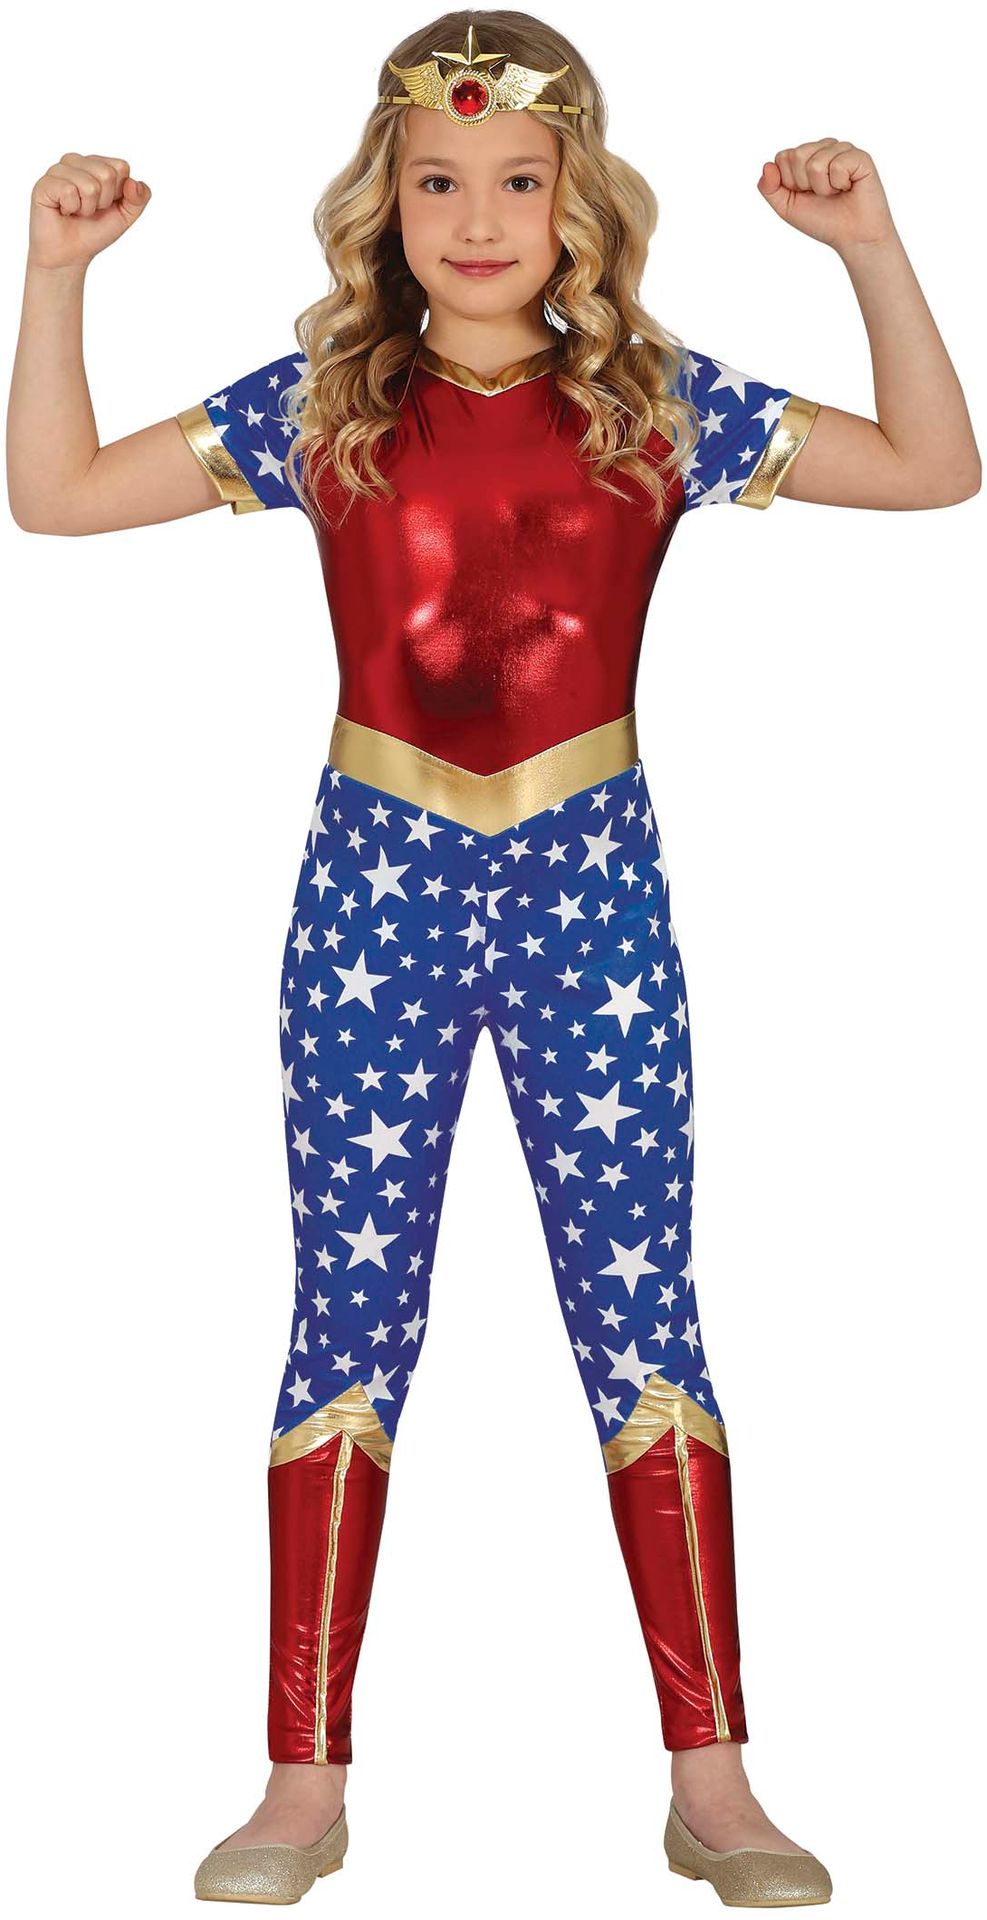 Wonder Woman outfit kind